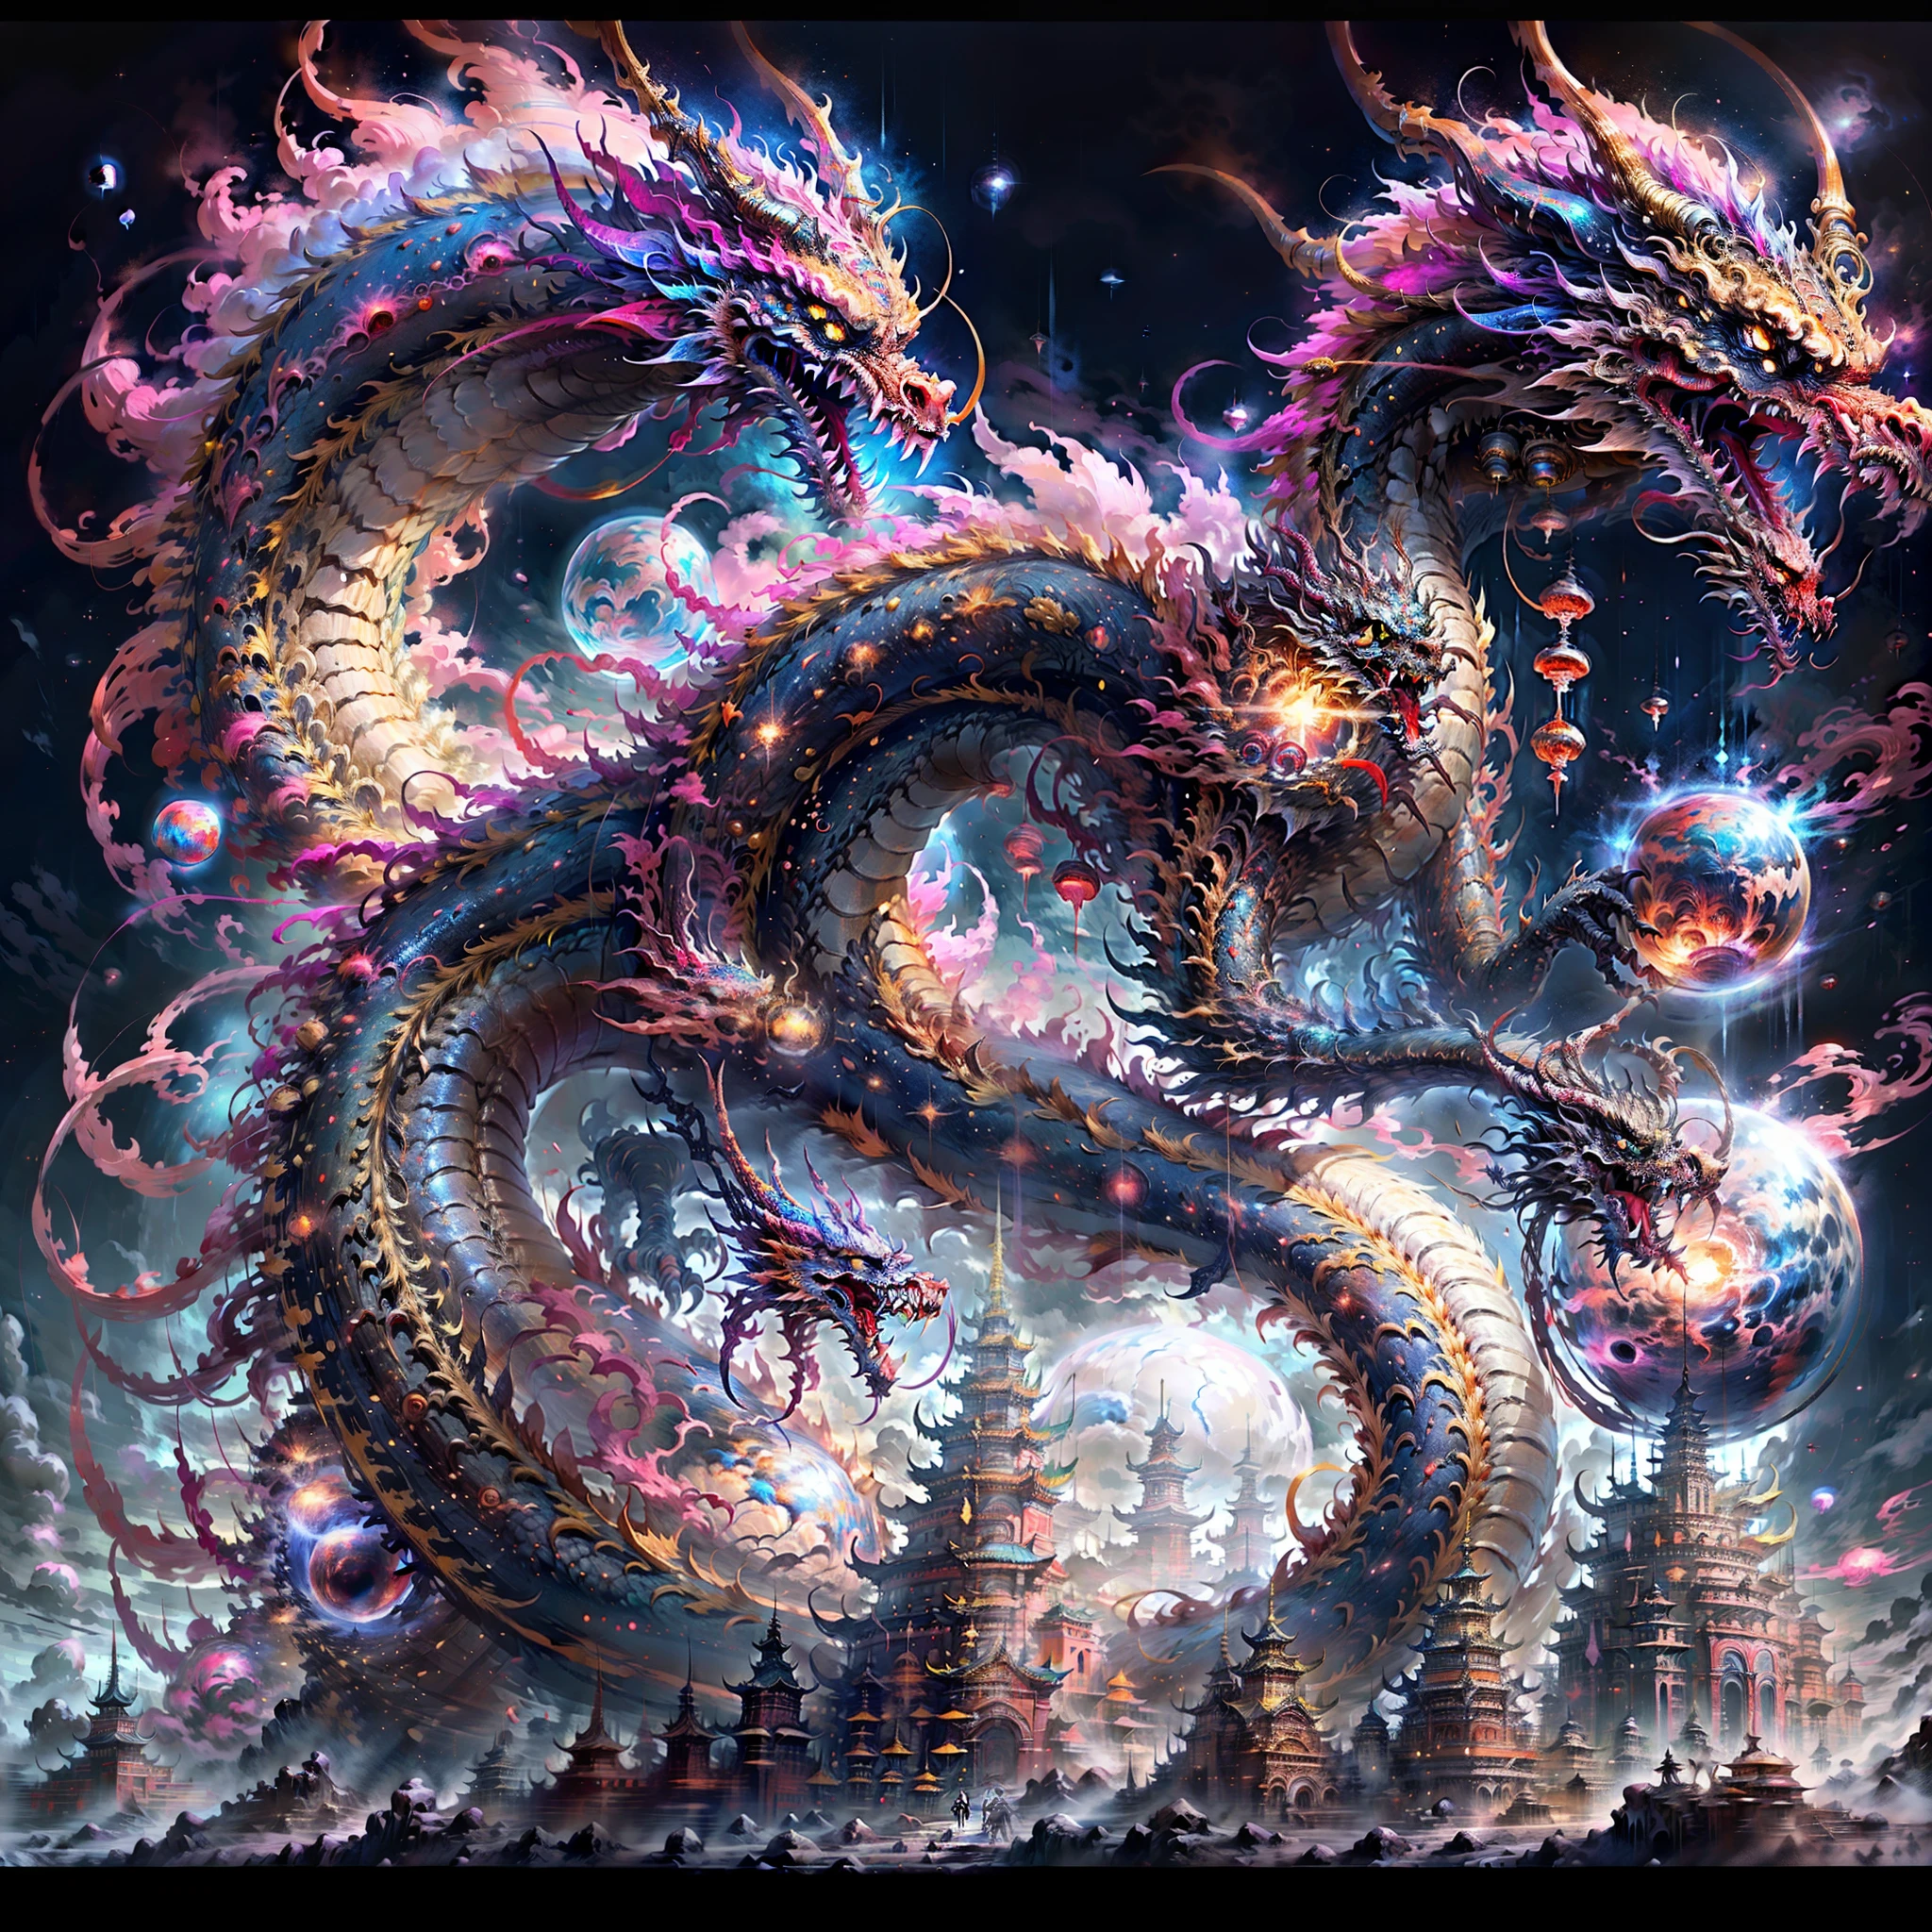 masterspiece, ultra-highres, no humans, intricate details, ff14style, painting of future cities on the moon, universes, stars, galaxies, planets, ((Chinese towns,)) bright colors, (length: 1), yellow eyes, clouds, scales, oriental dragon, opened mouth, sharp teeth, flying, horns, teeth, claws, fangs, in a fantastical otherworldly visual style,